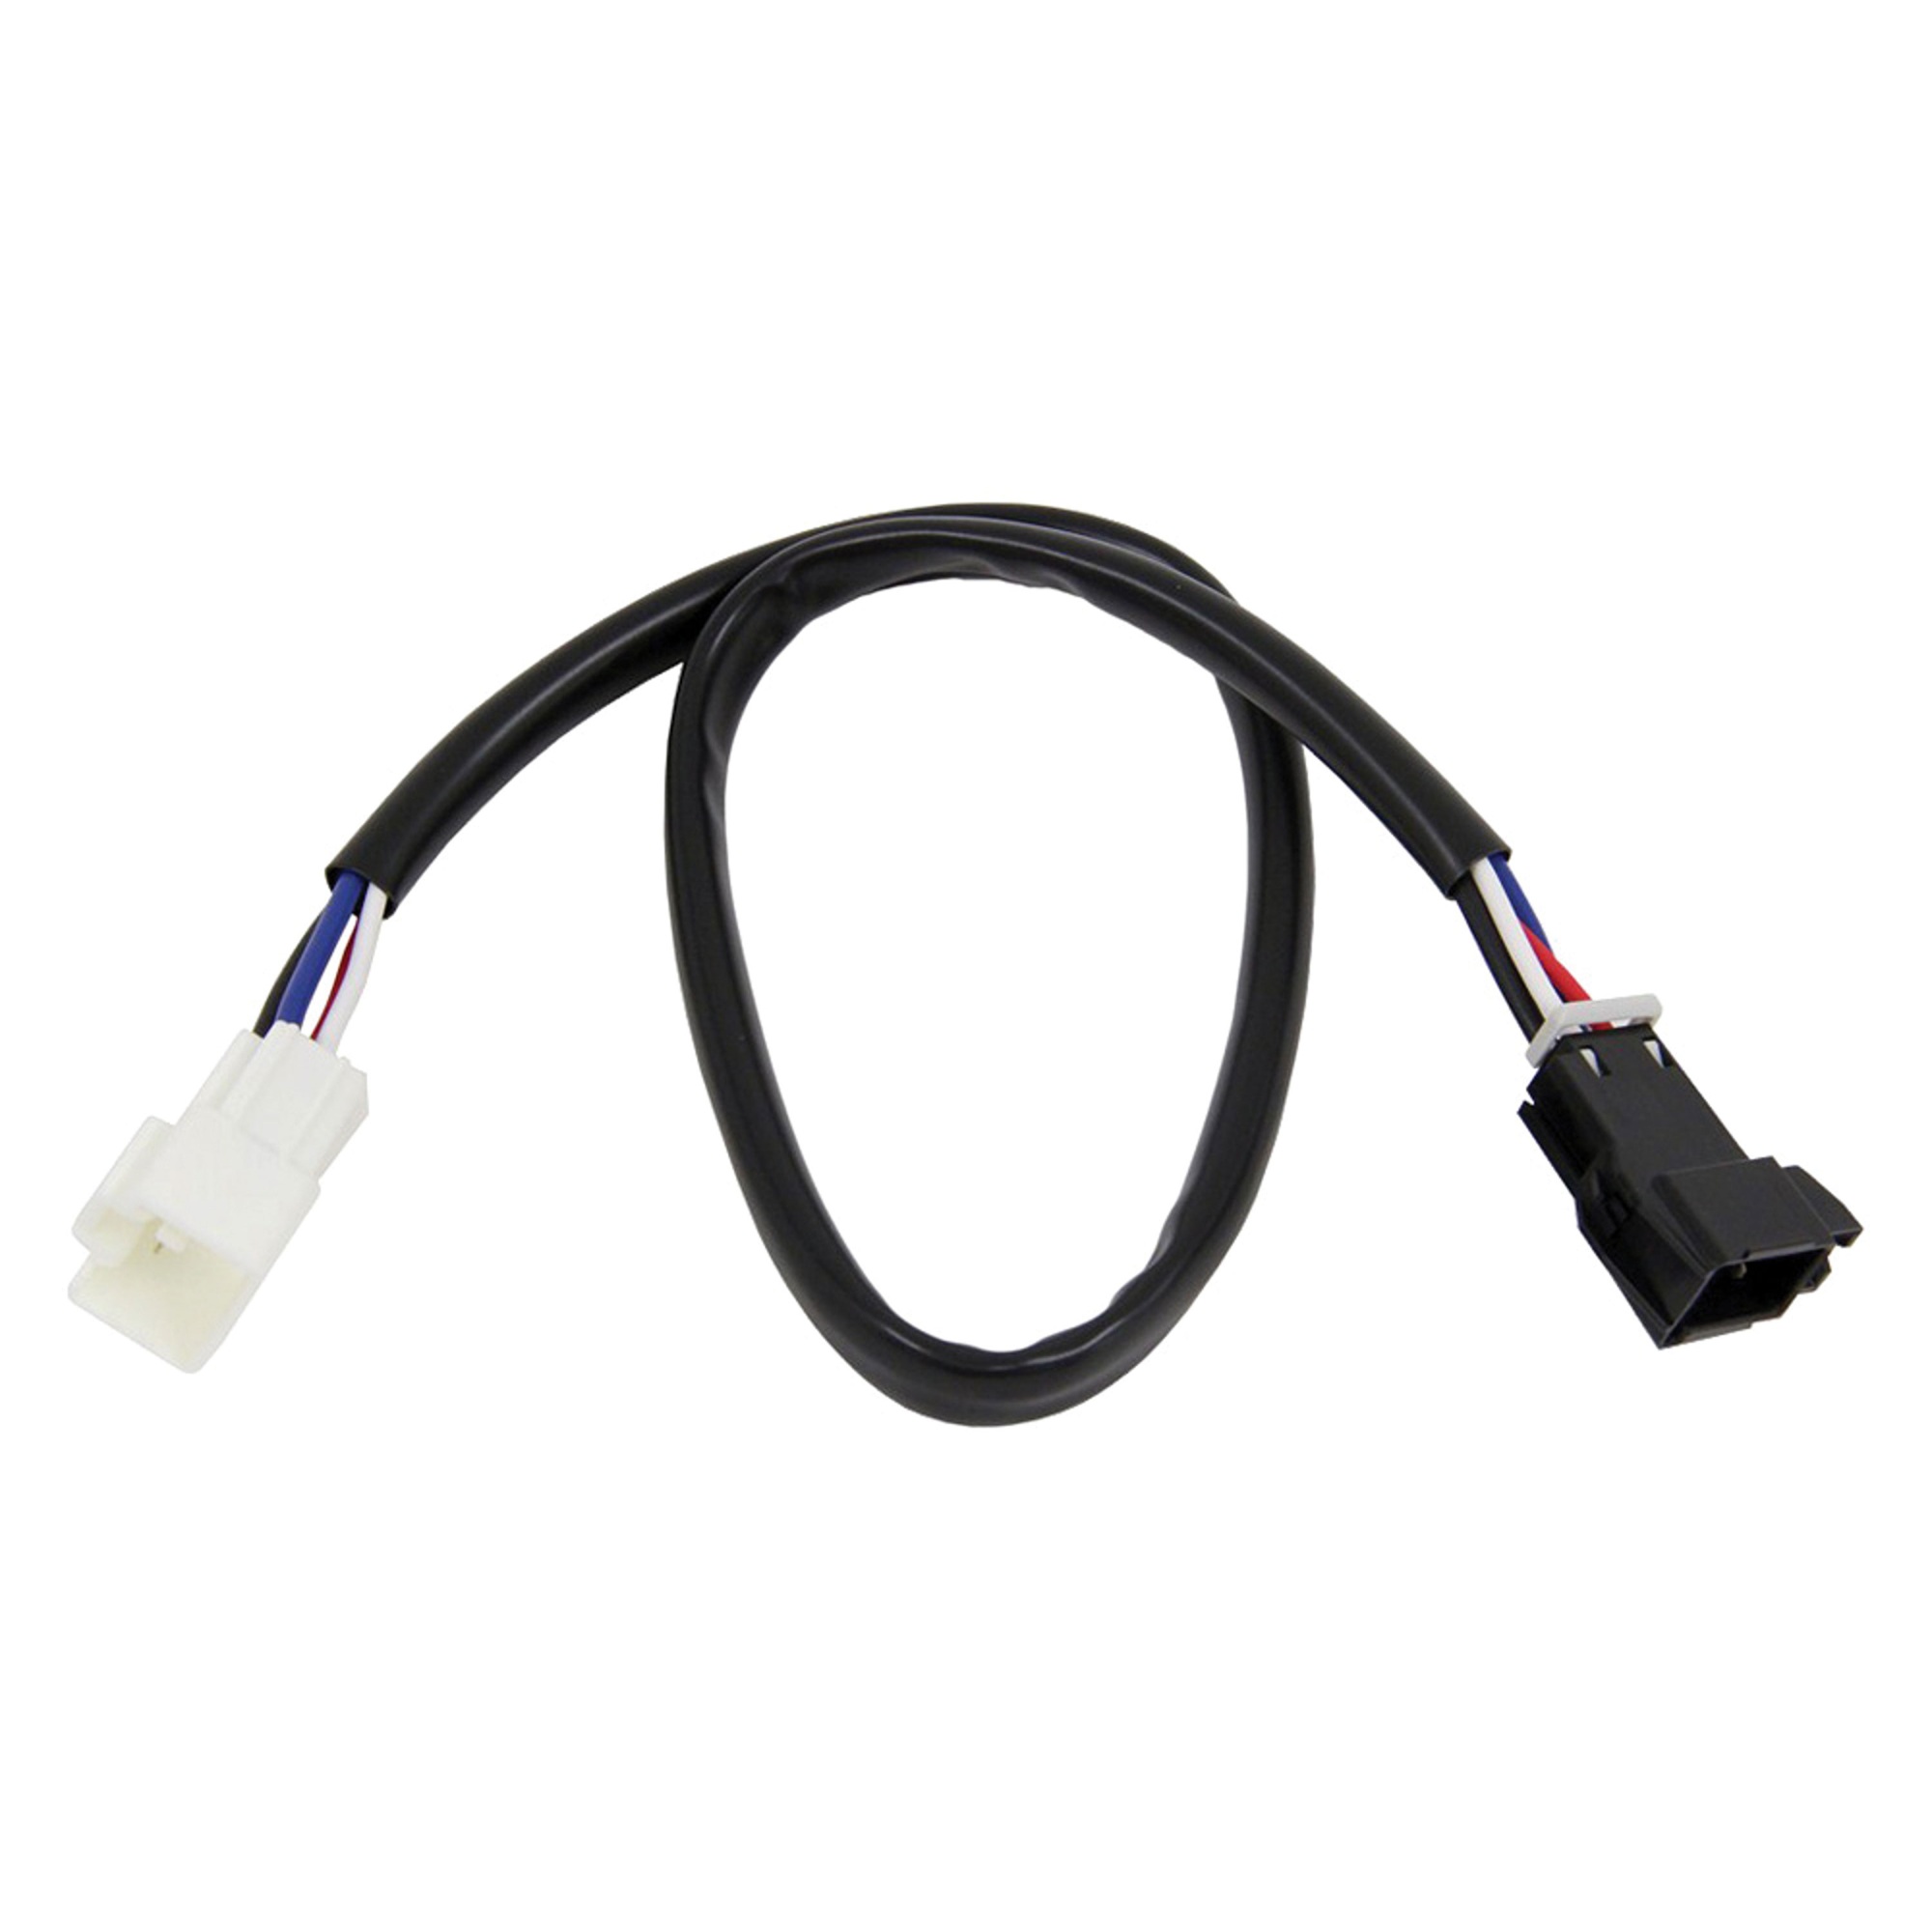 Hayes 81785HBC Quik-Connect OEM Wiring Harness For Lexus/Toyota